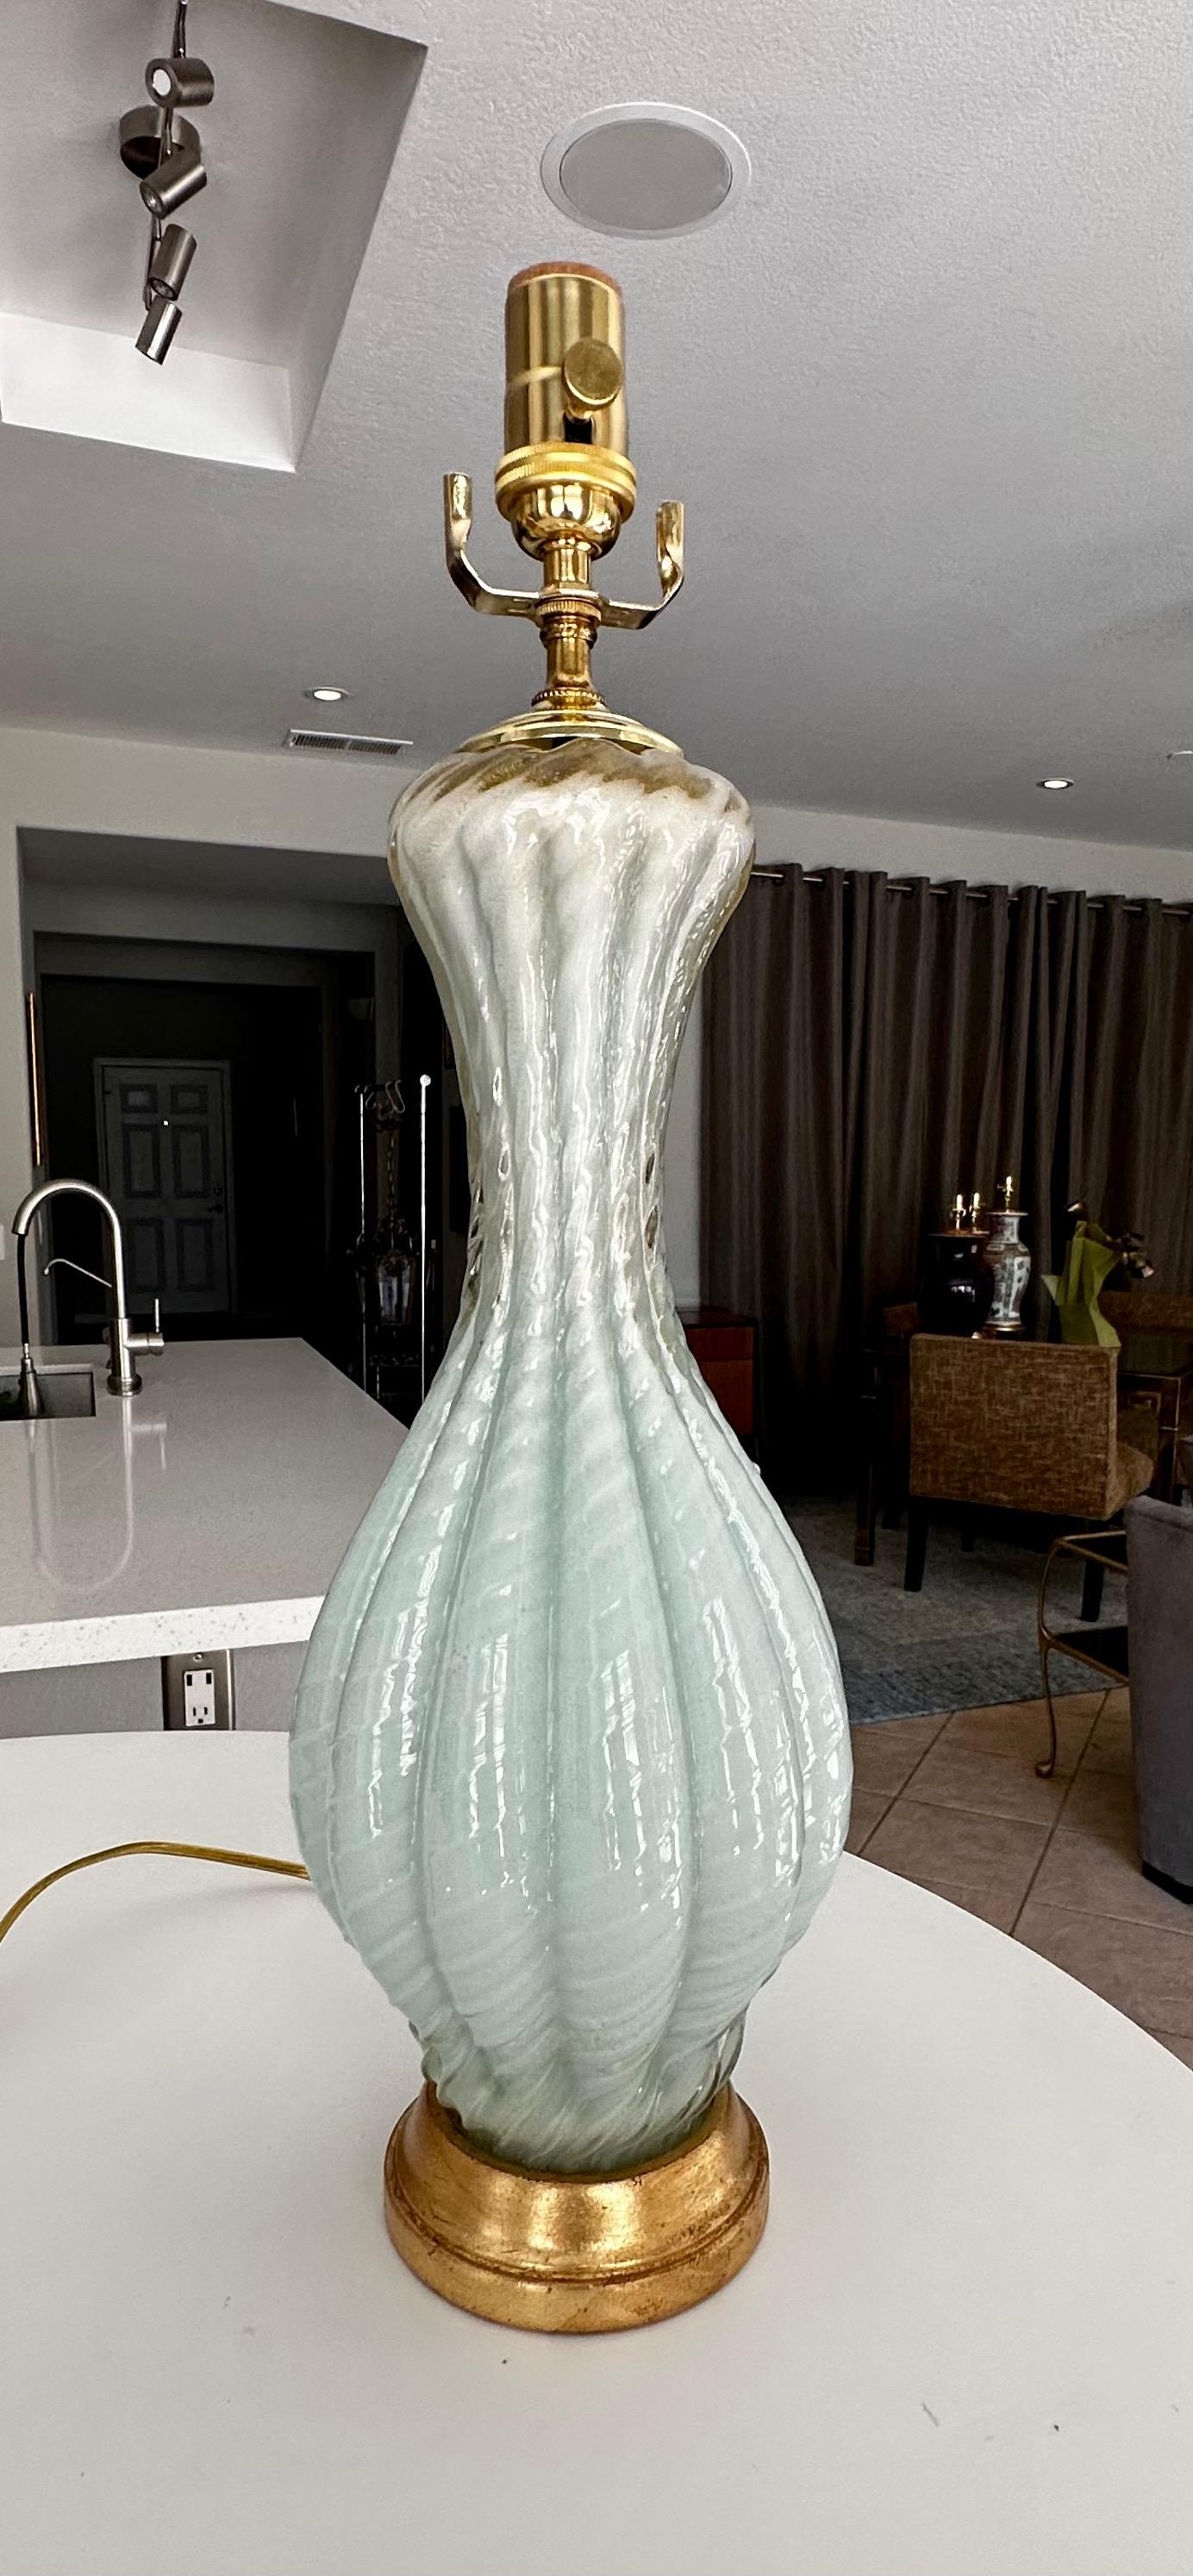 Murano Italian handblown light seafoam green colored glass table lamp. The glass lamp body has bias raised ribbing with light gold inclusions, resting on an giltwood base. Newly wired with new 3 way brass socket and cord. Glass alone is 14.5